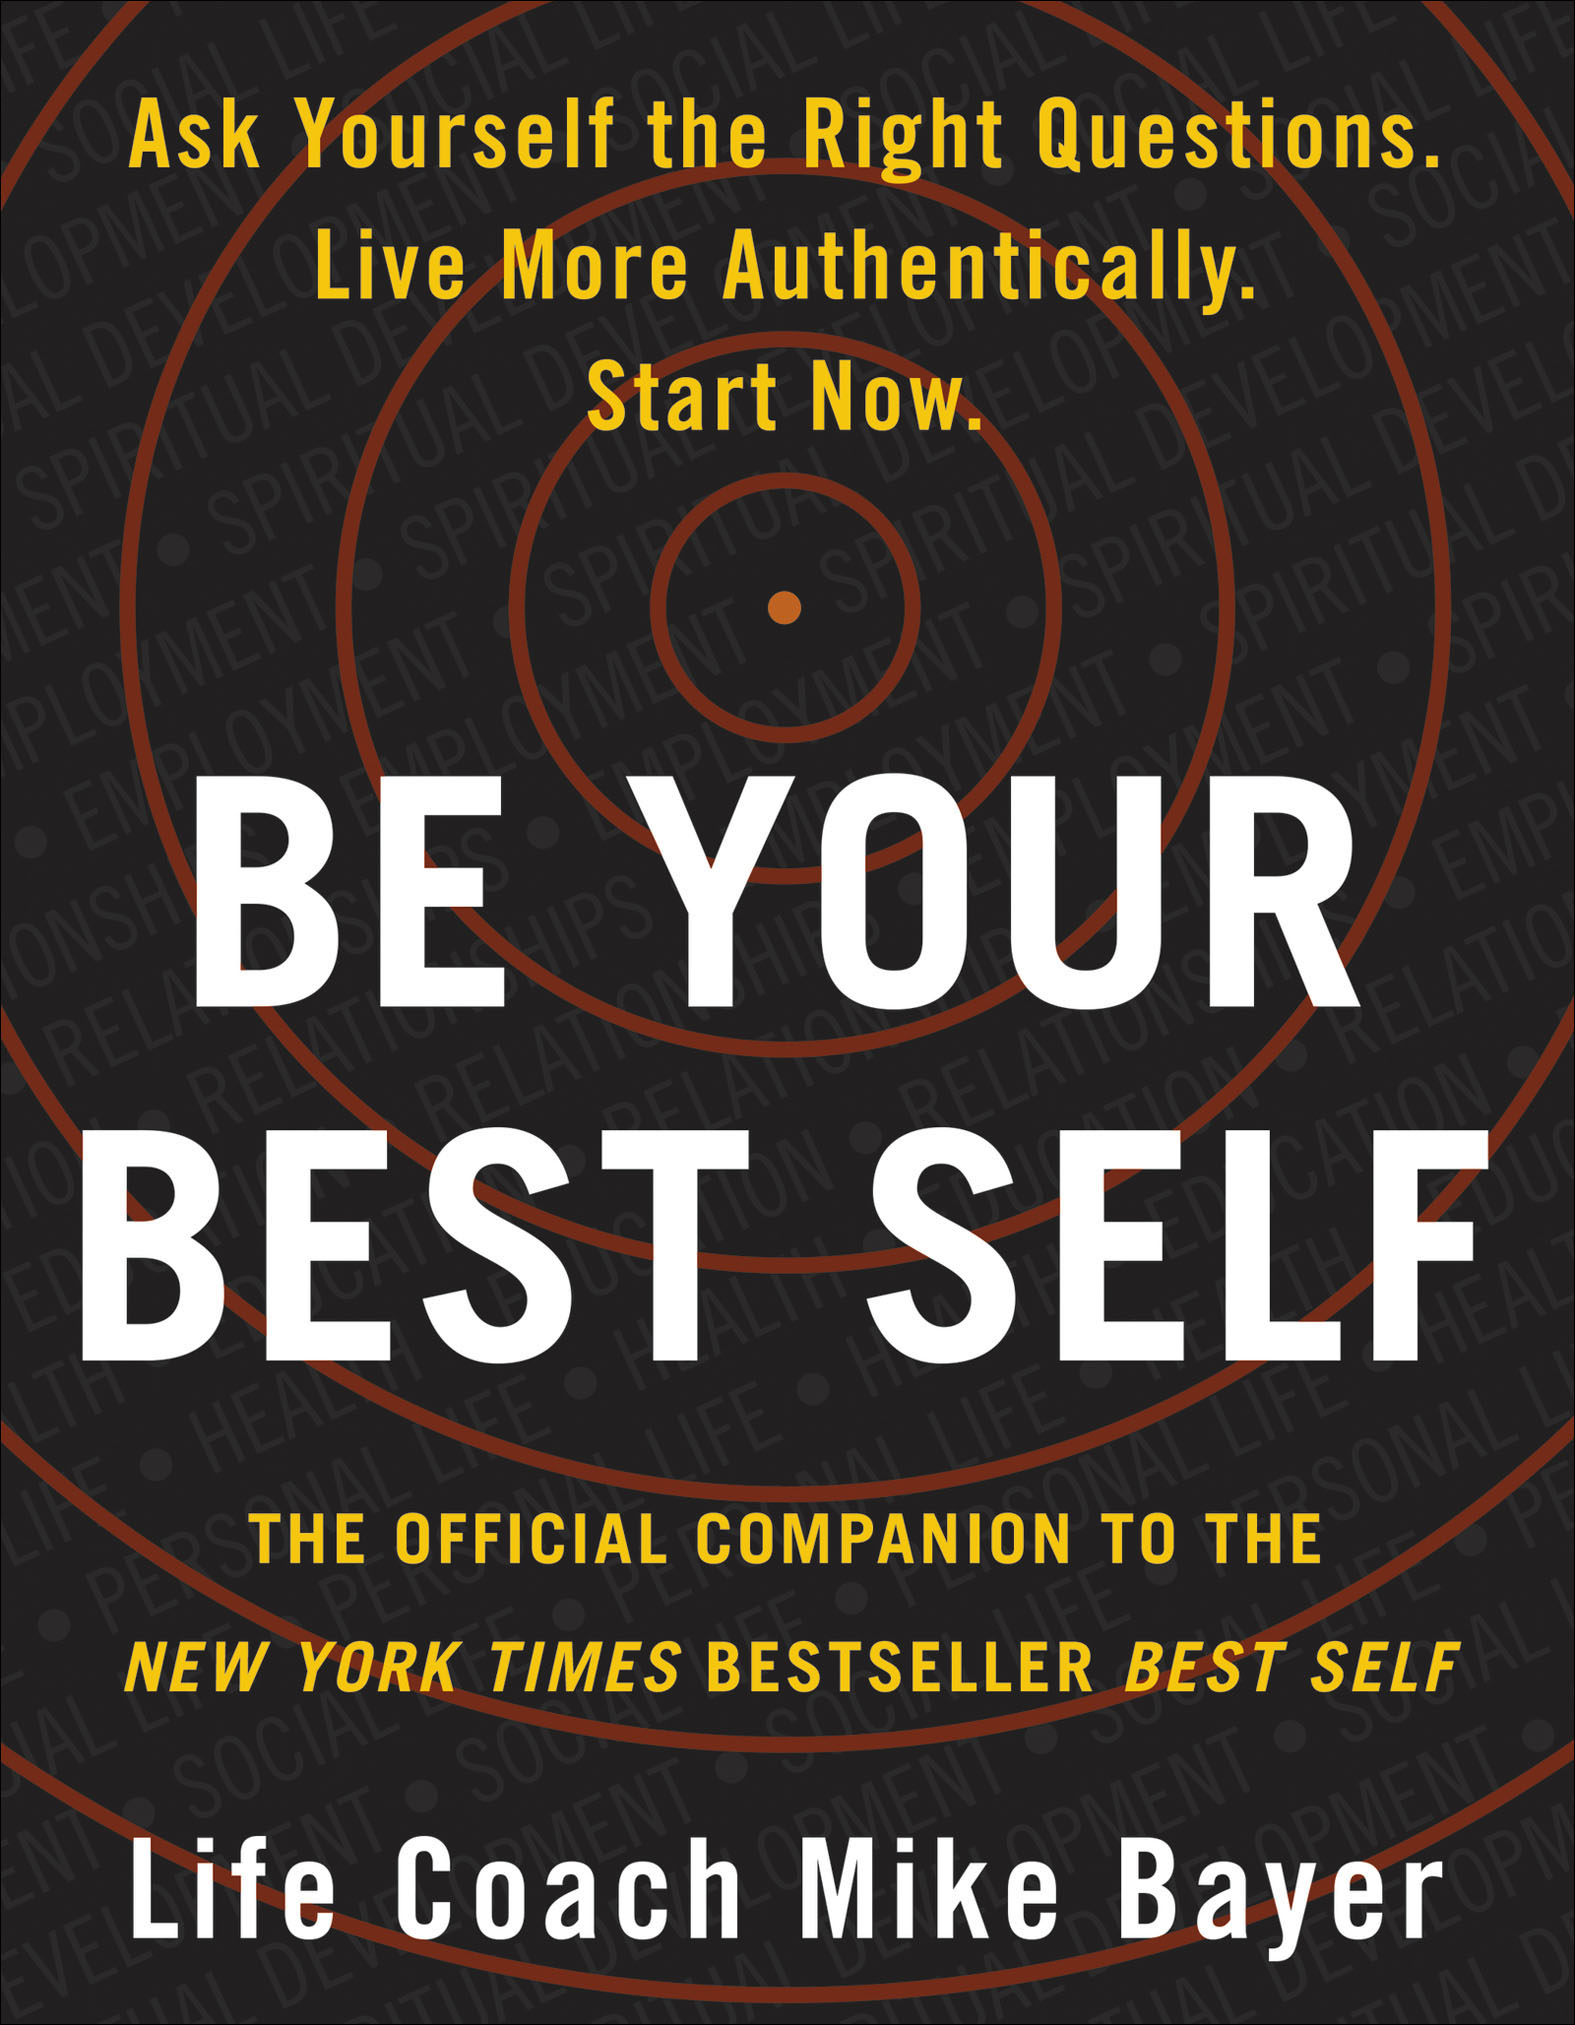 Be your best self the official companion to the New York Times bestseller best self cover image